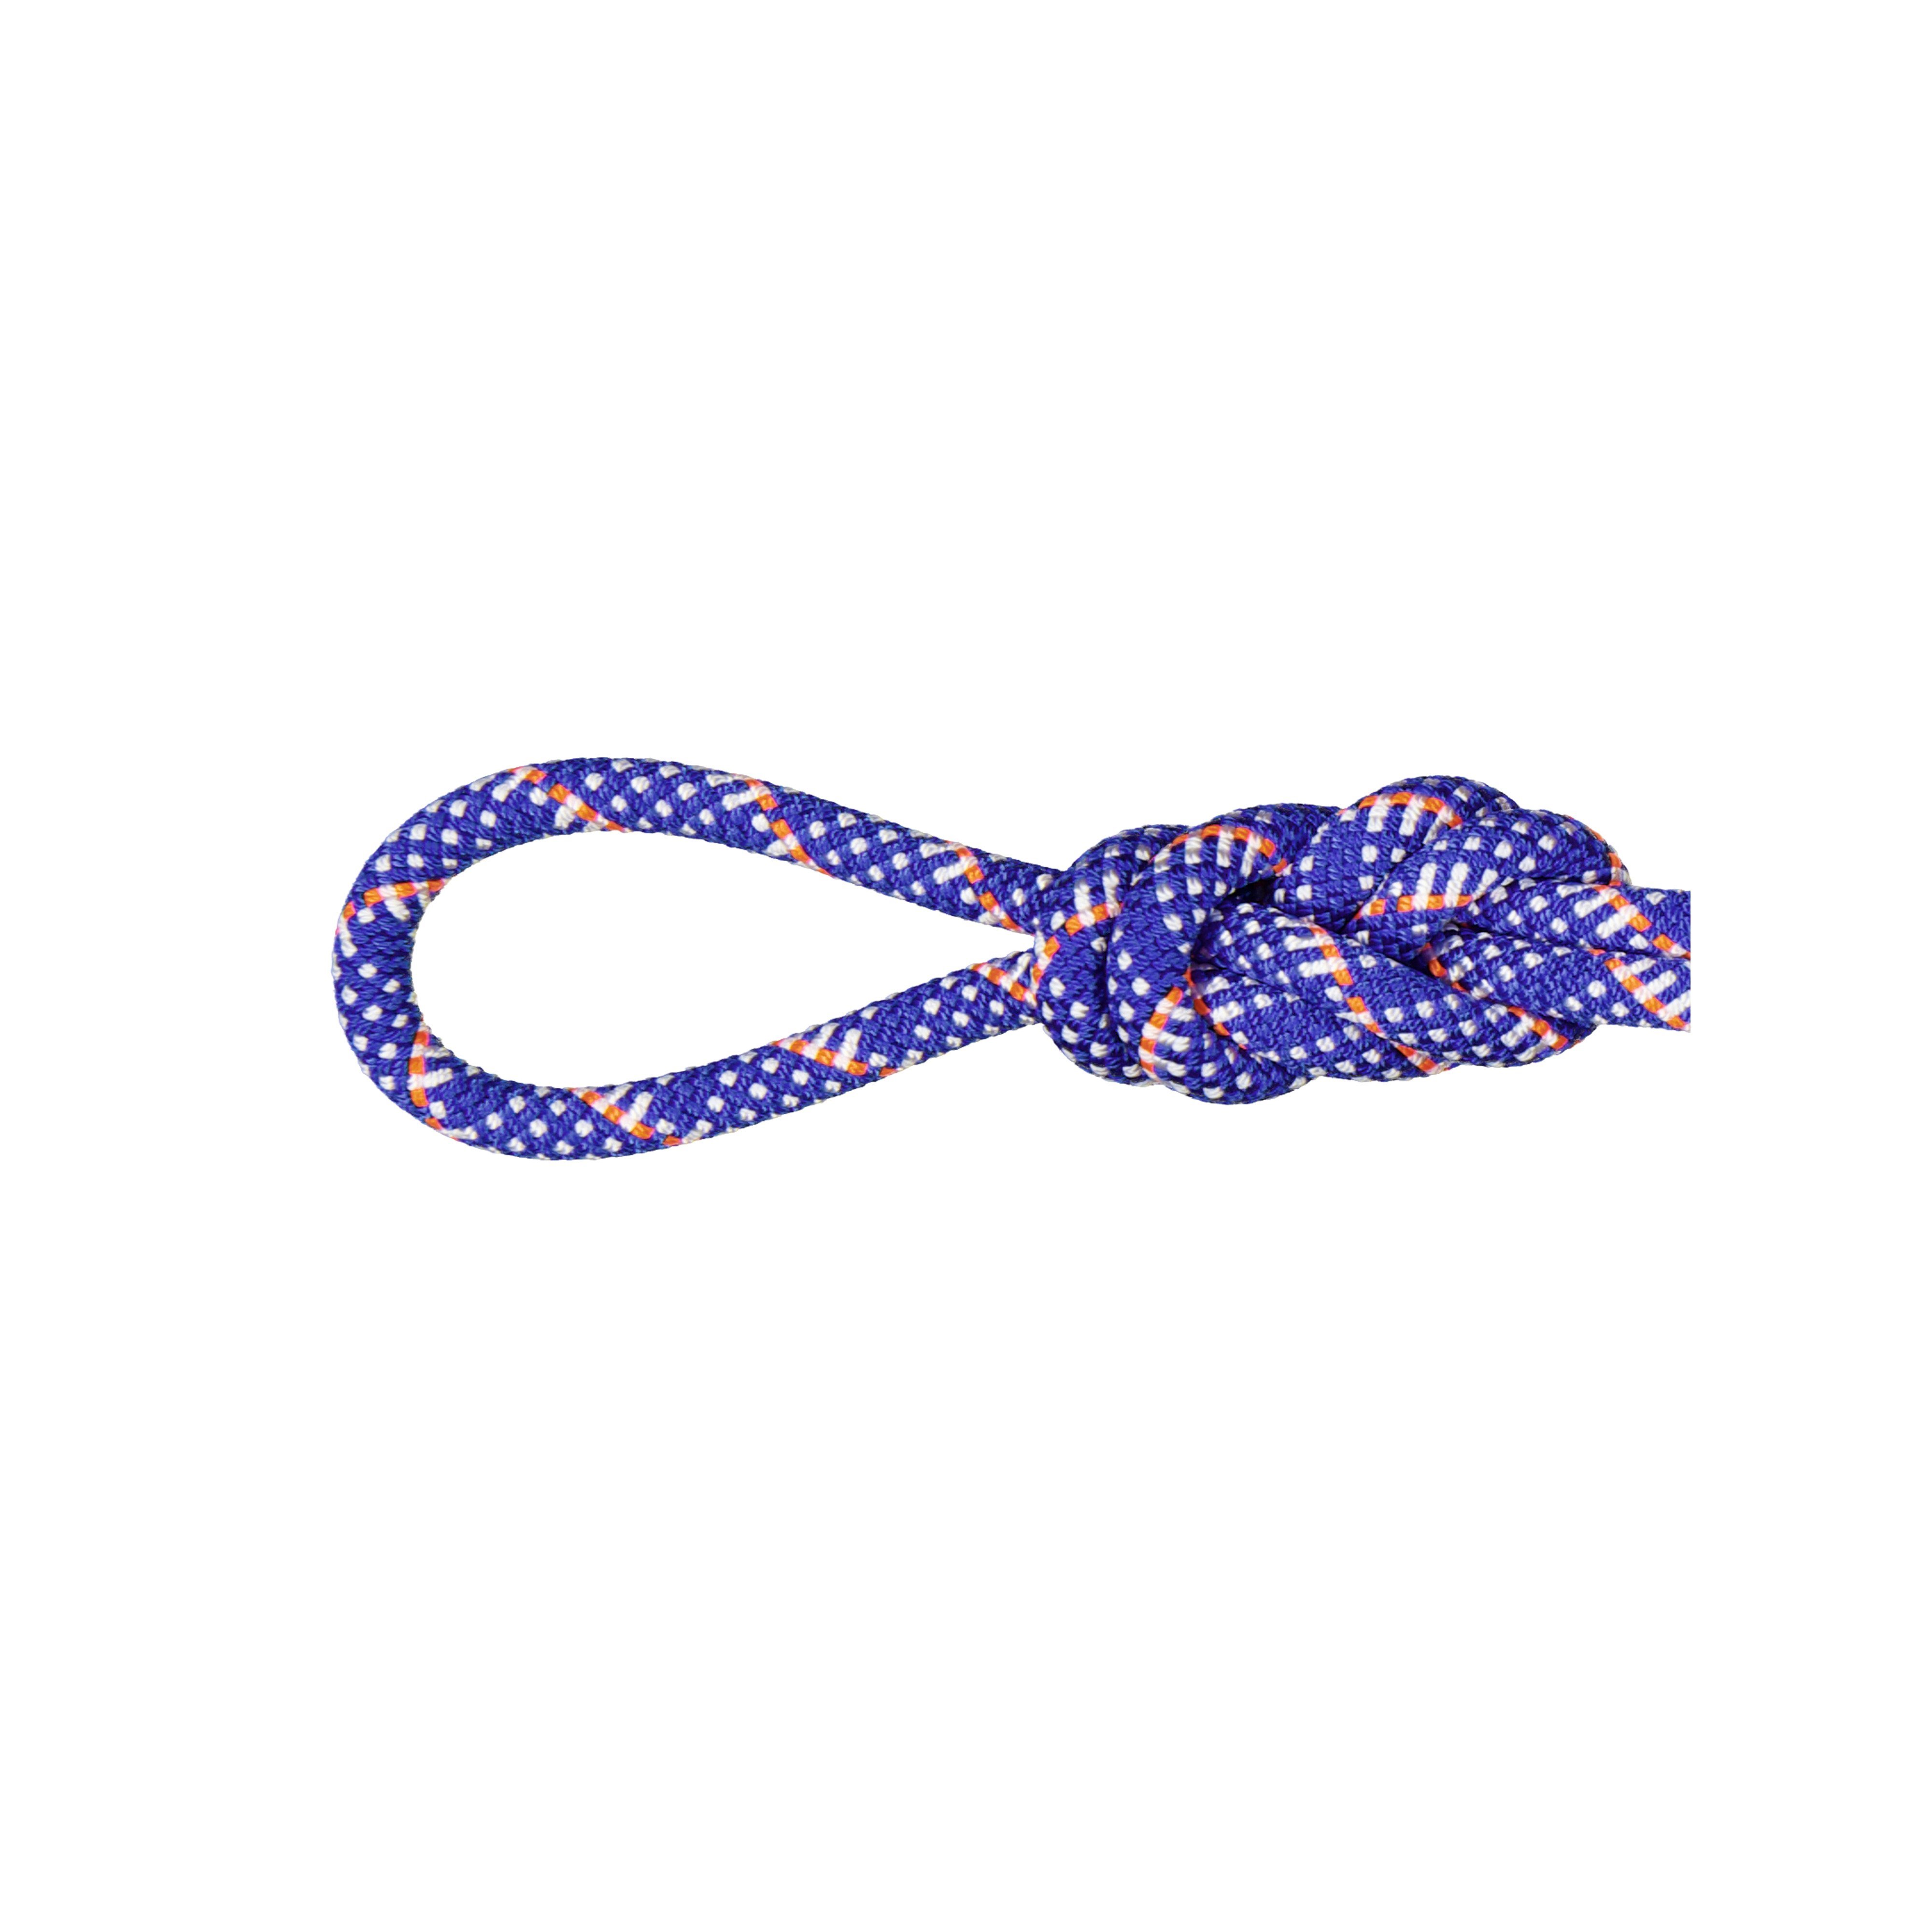 10.1 Gym Station Classic Rope - Classic Standard, blue-white, 200 m thumbnail